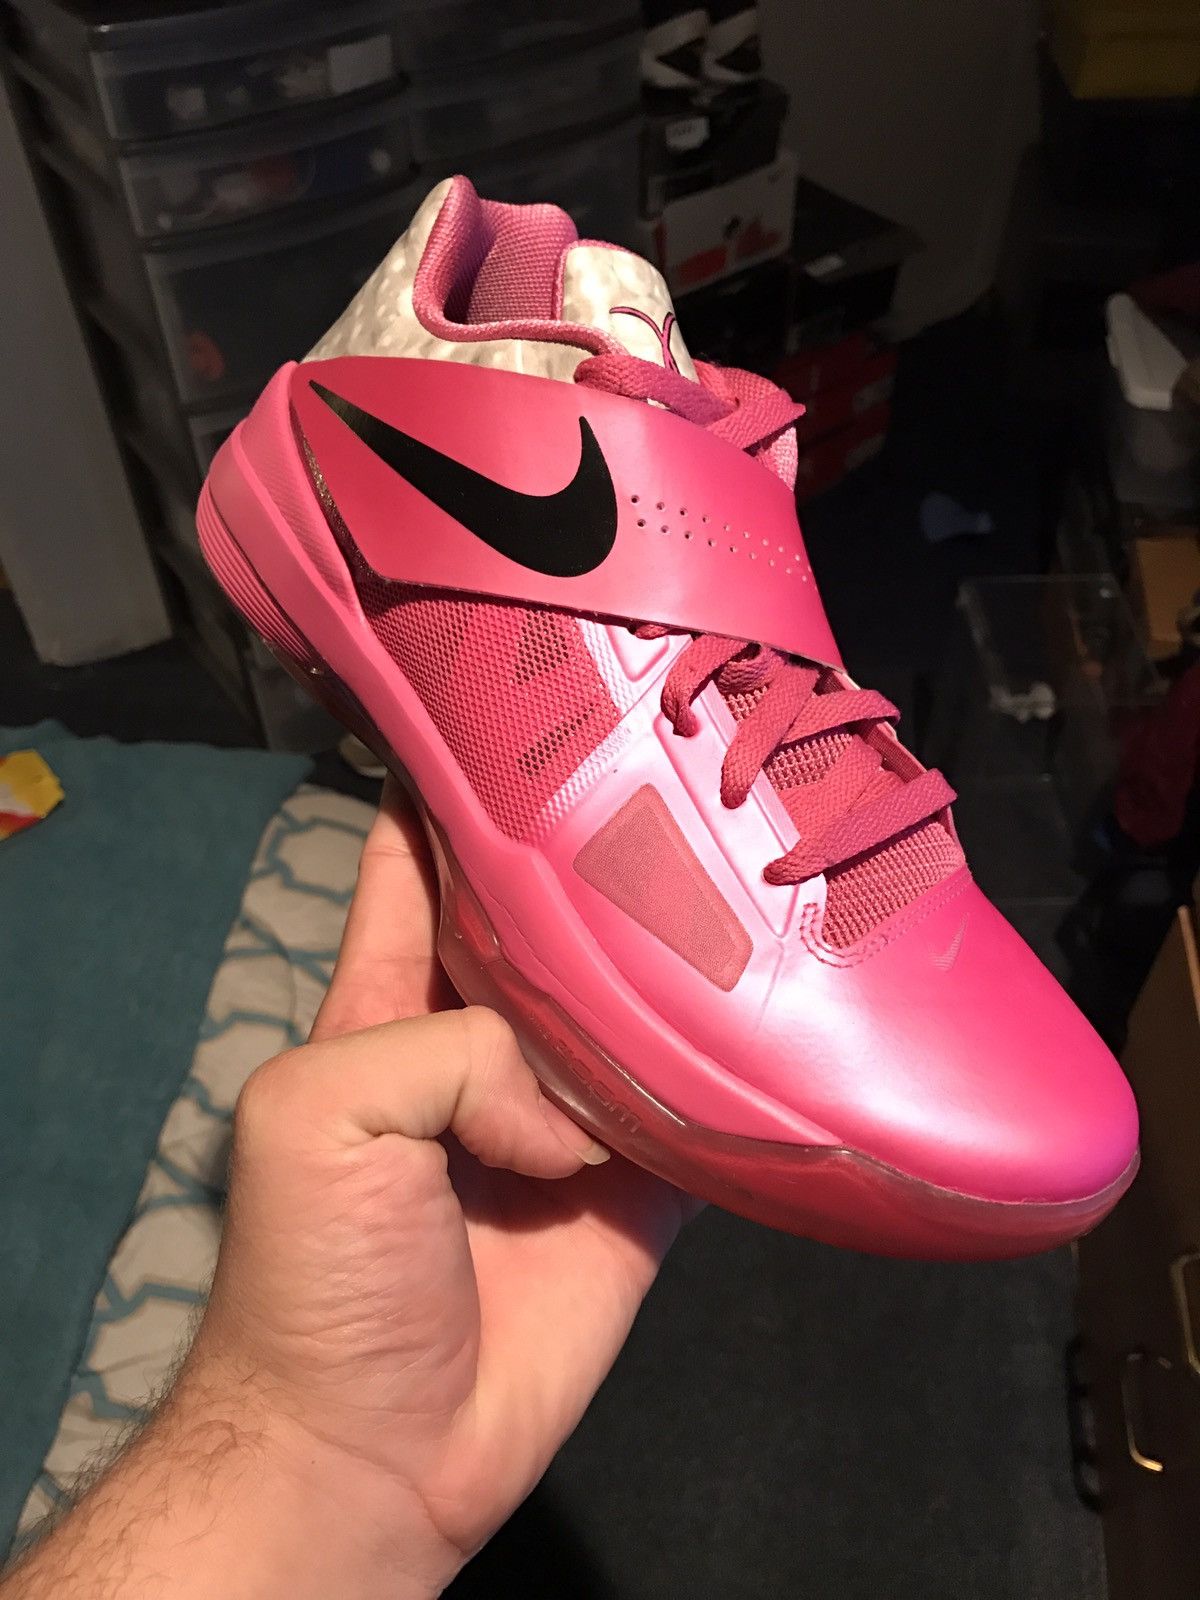 Nike Aunt Pearl Kd4s Size US 10 / EU 43 - 2 Preview